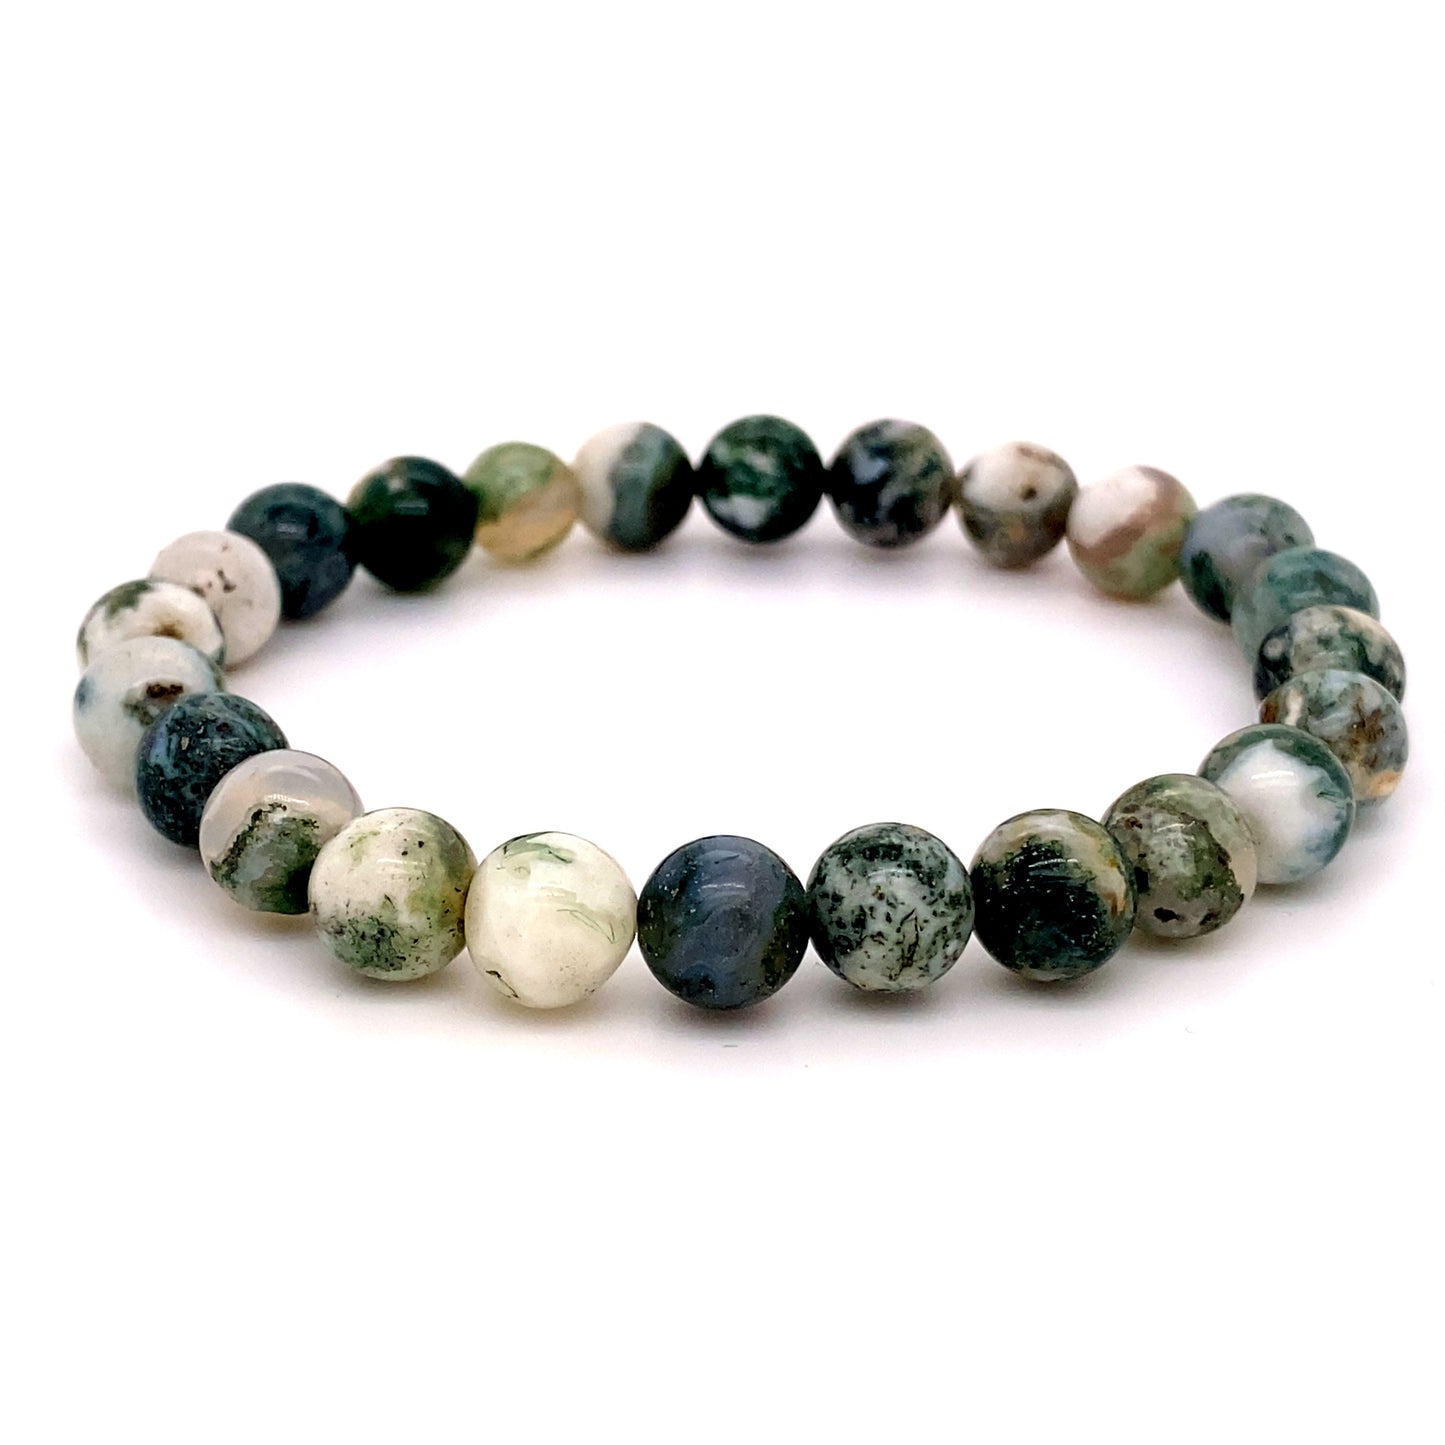 
                  
                    4mm Beaded Stone Bracelet made of varied polished moss agate beads, showcasing different shades of green, gray, and white, against a white background. This healing stone bracelet is ideal for those seeking the soothing properties attributed to agate gemstones.
                  
                